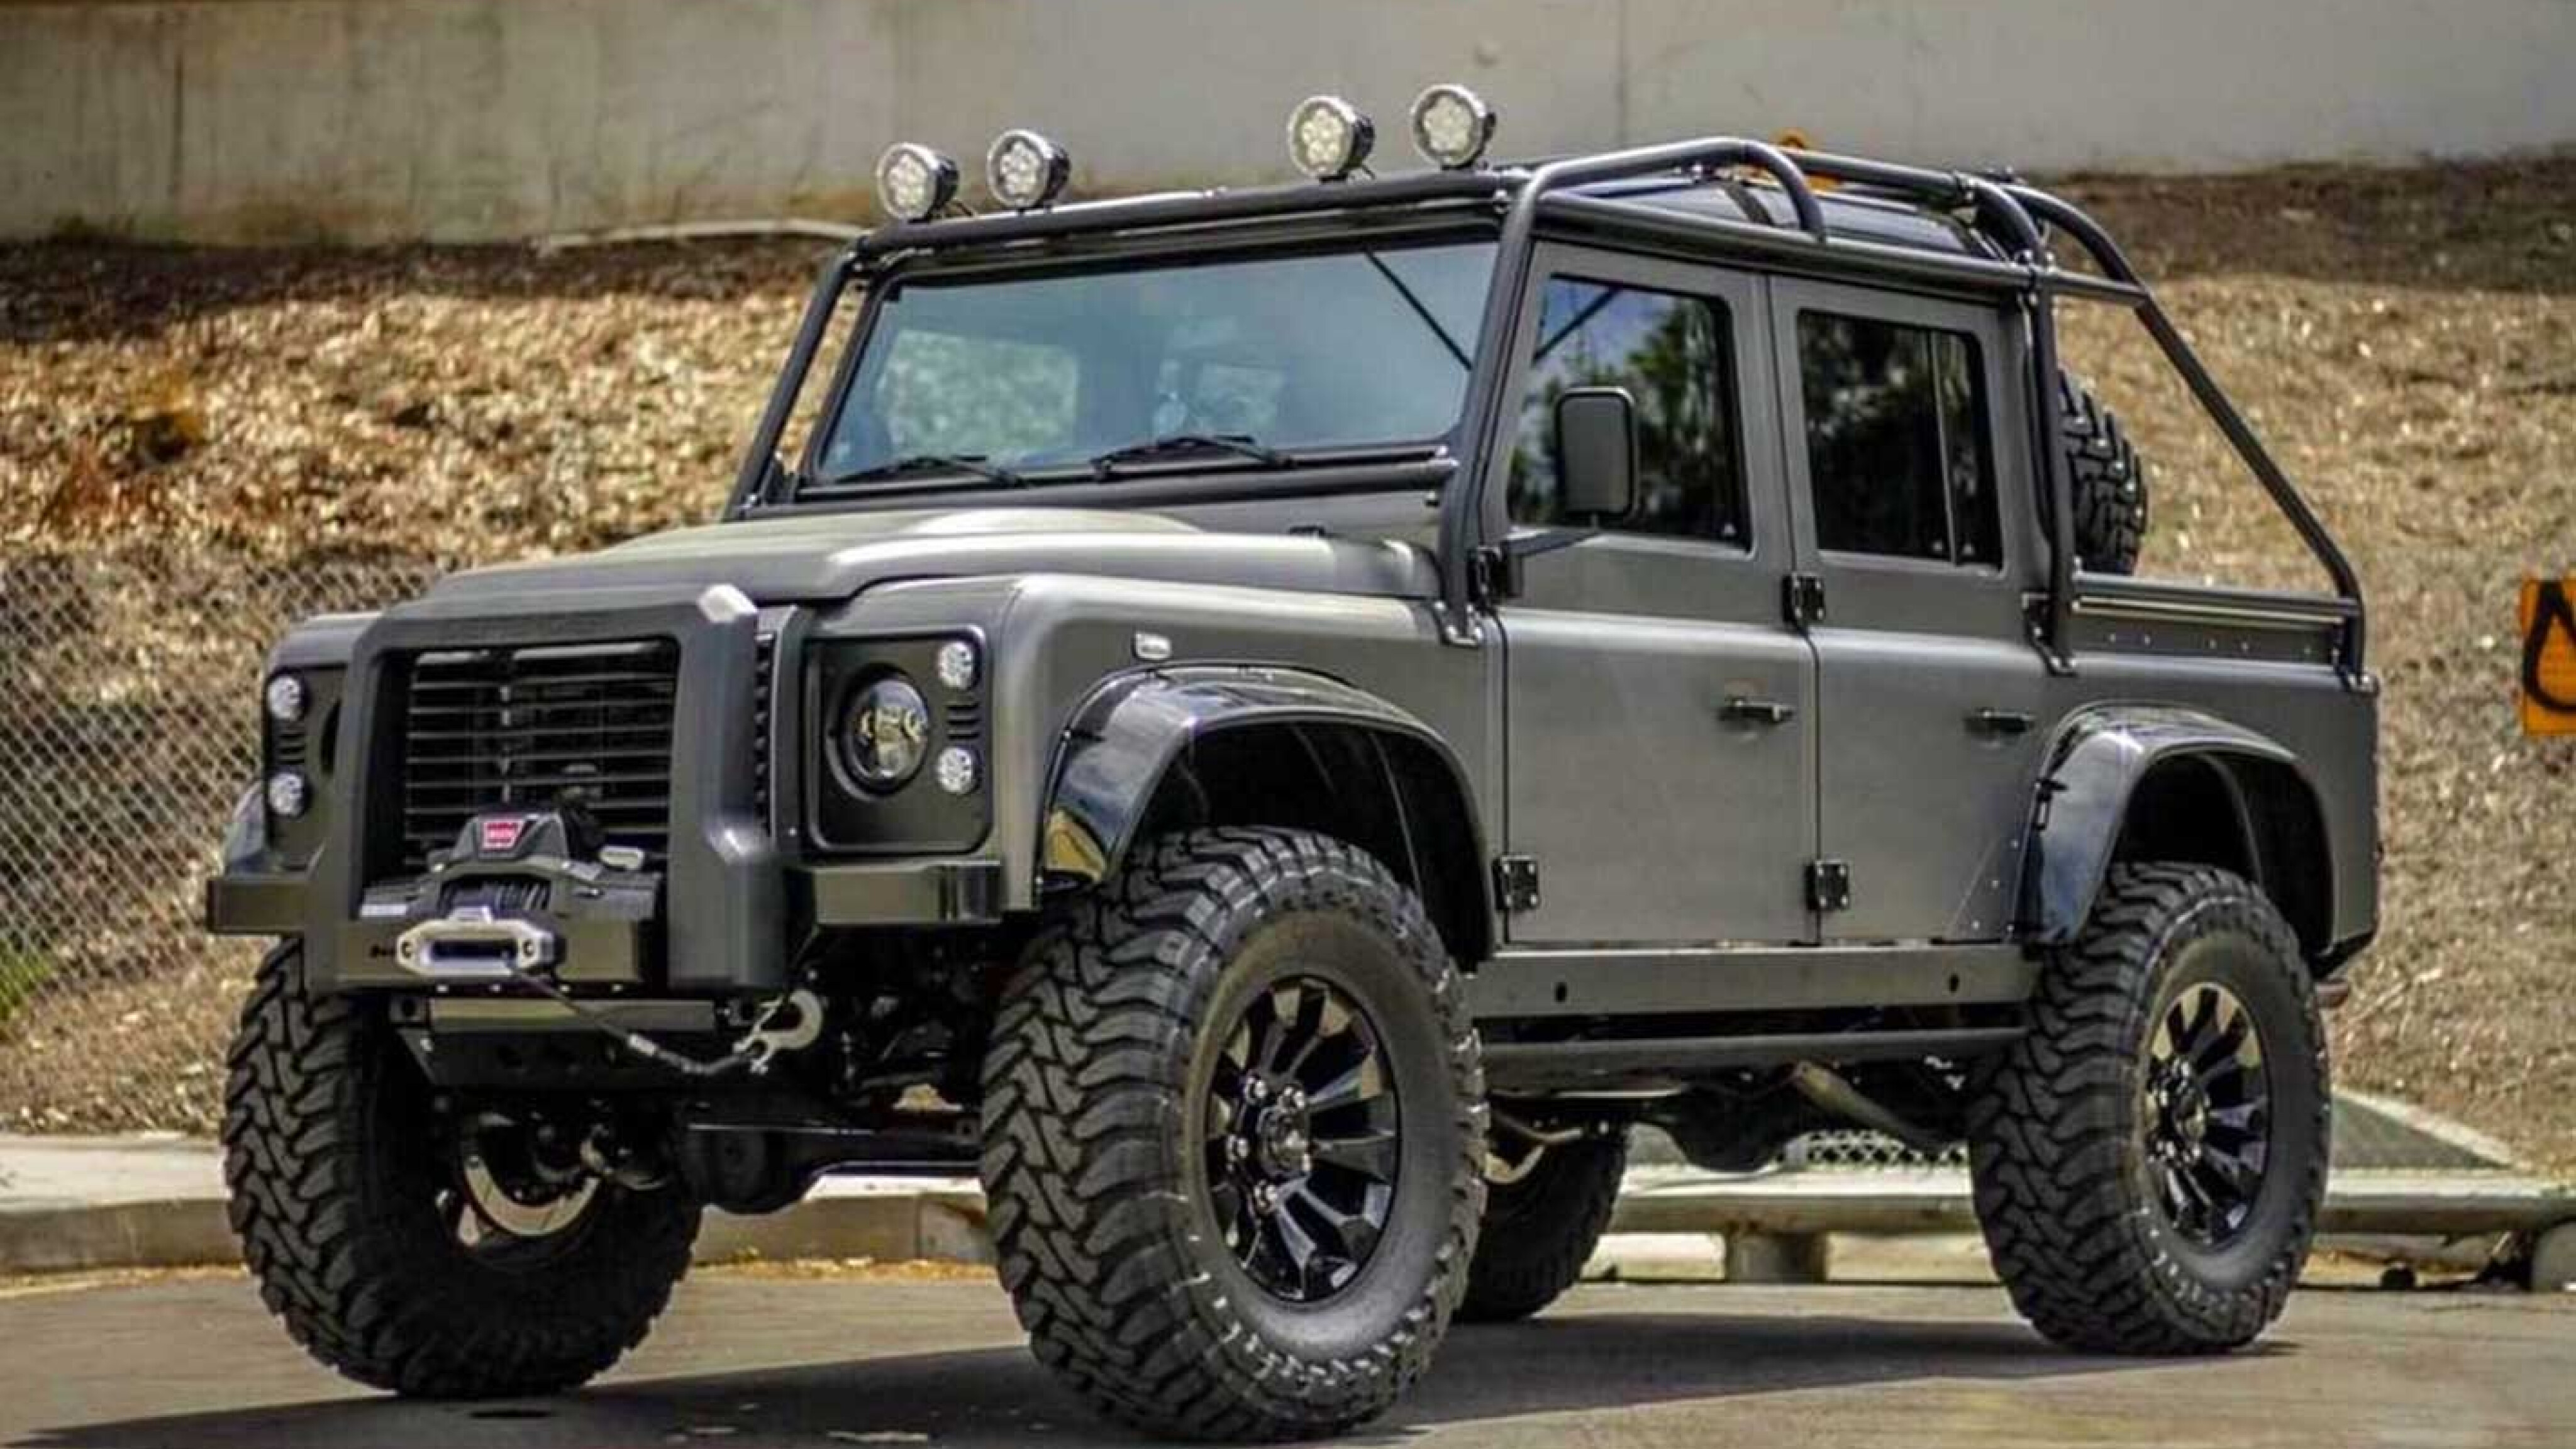 Himalaya Spectre is the ultimate Land Rover Defender